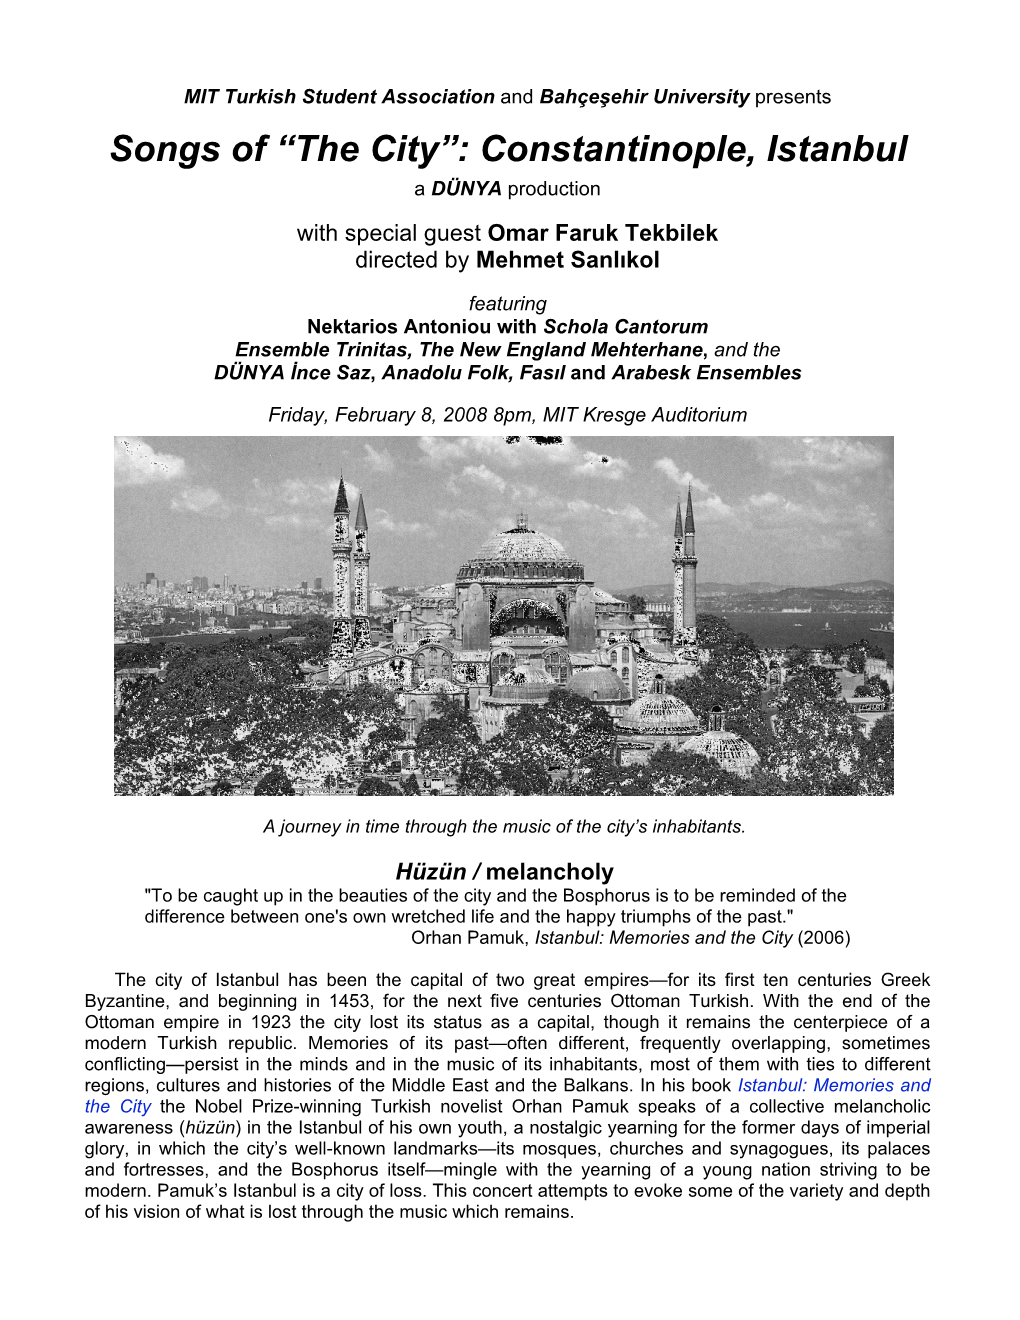 Songs of “The City”: Constantinople, Istanbul